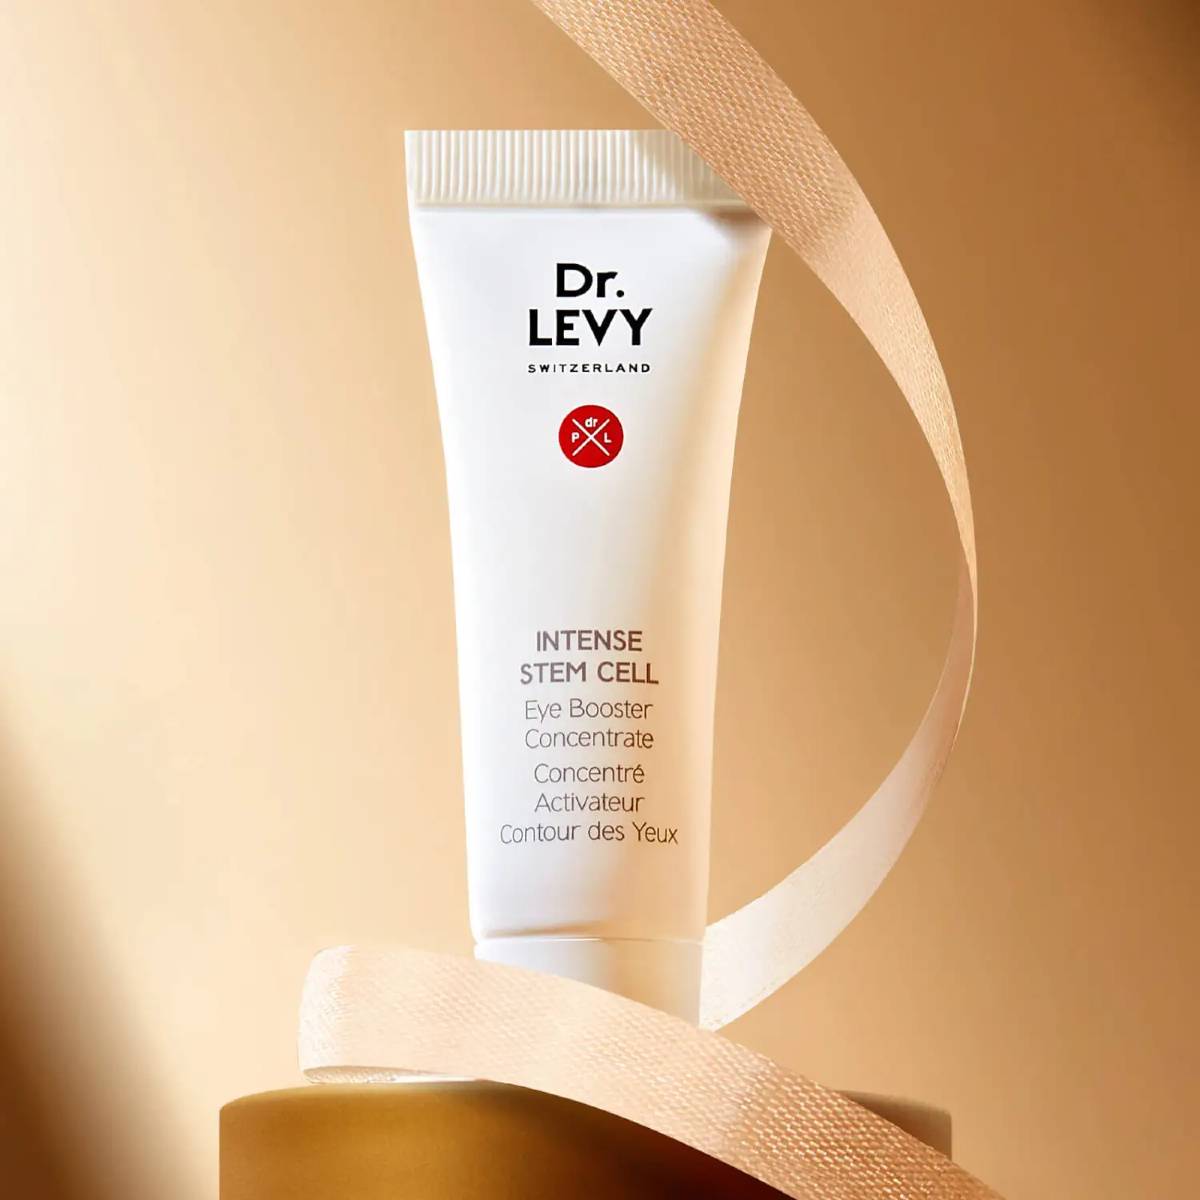  Dr Levy Eye Booster Concentrate